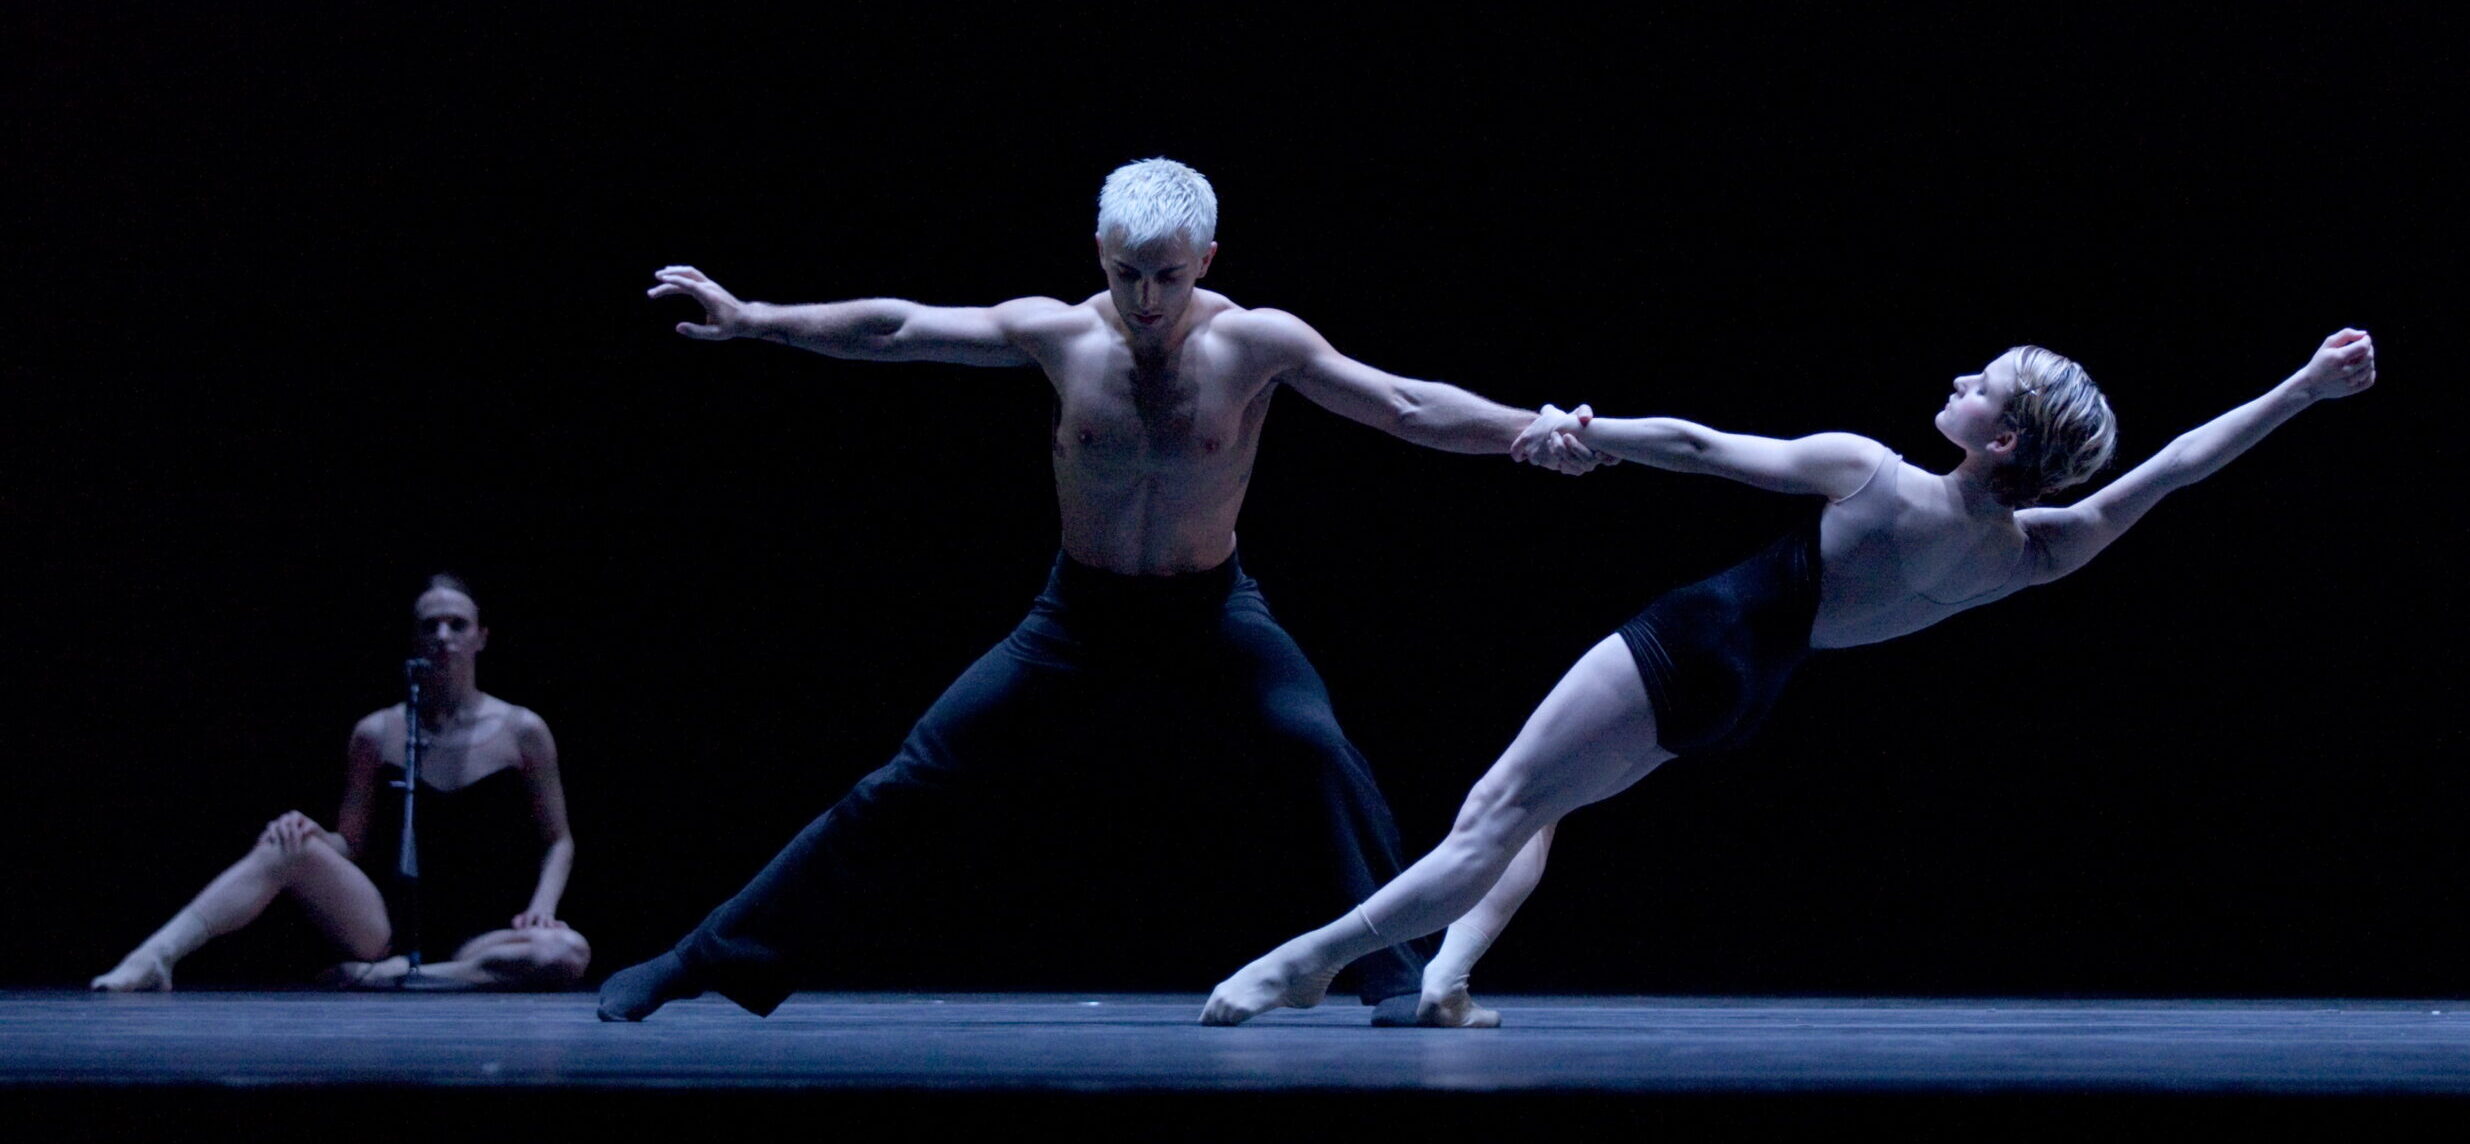 A pair of ballet dancers perform a contemporary duet on stage, their movement capturing a moment of intense emotion and physical expression, while a solitary figure watches from the background.